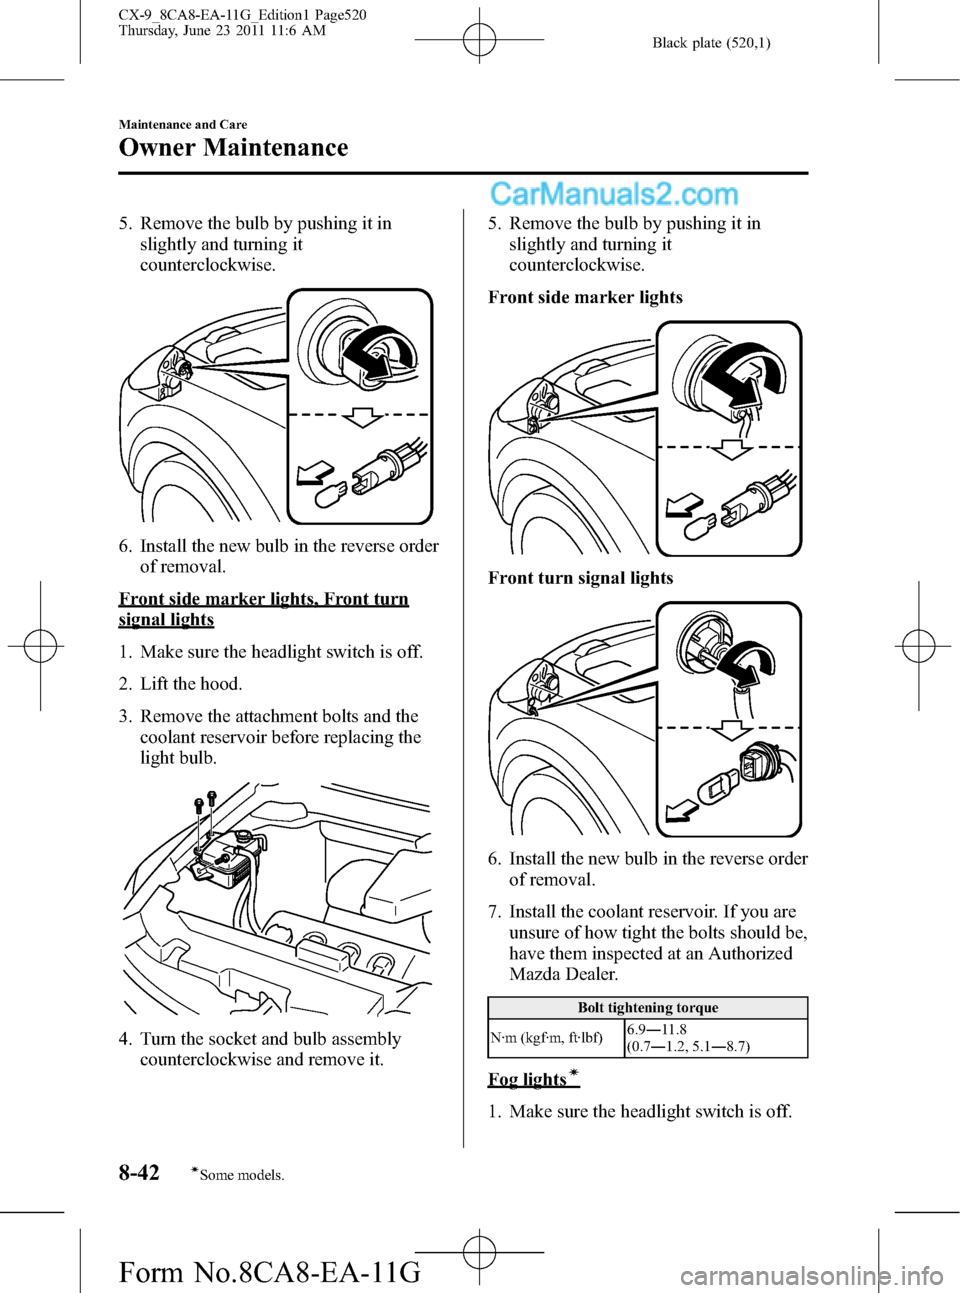 MAZDA MODEL CX-9 2012  Owners Manual (in English) Black plate (520,1)
5. Remove the bulb by pushing it in
slightly and turning it
counterclockwise.
6. Install the new bulb in the reverse order
of removal.
Front side marker lights, Front turn
signal l